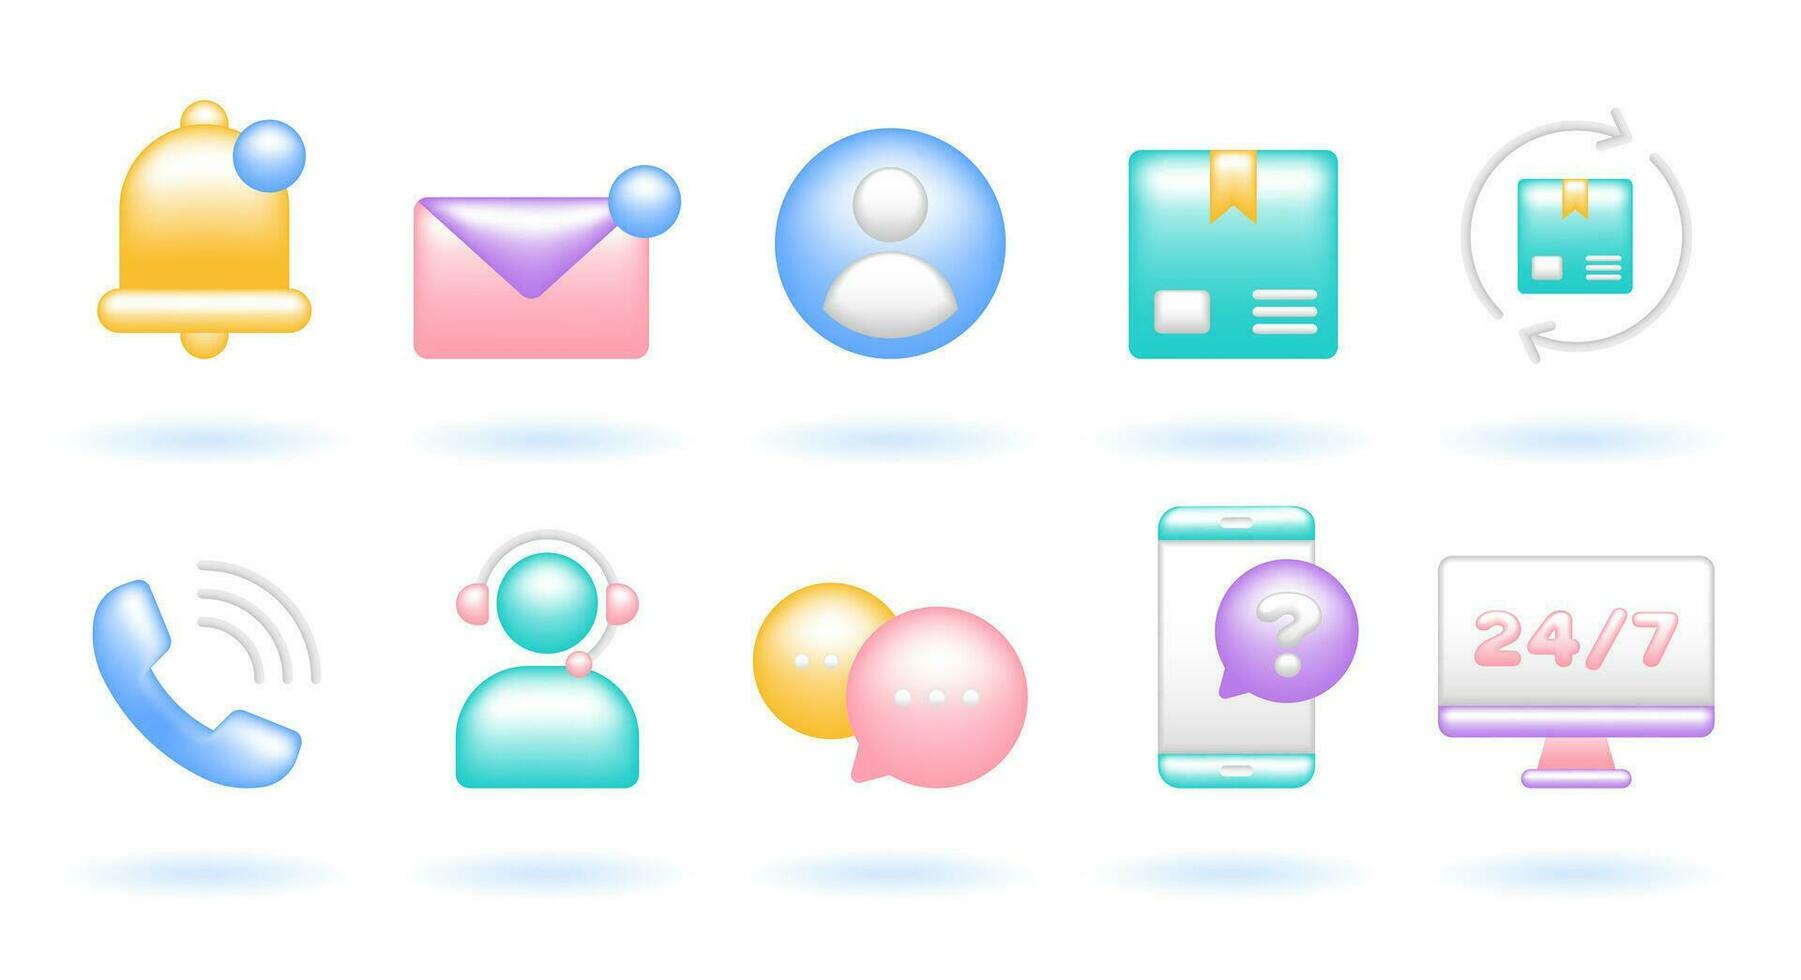 3D Icon Set of Customer Service Concept. Bell, Email, Profile, Package, Return, Phone, Call Center, Chat, 247. Cute Realistic Cartoon Minimal Style. 3D Render Vector Icons UX UI Isolated Illustration.